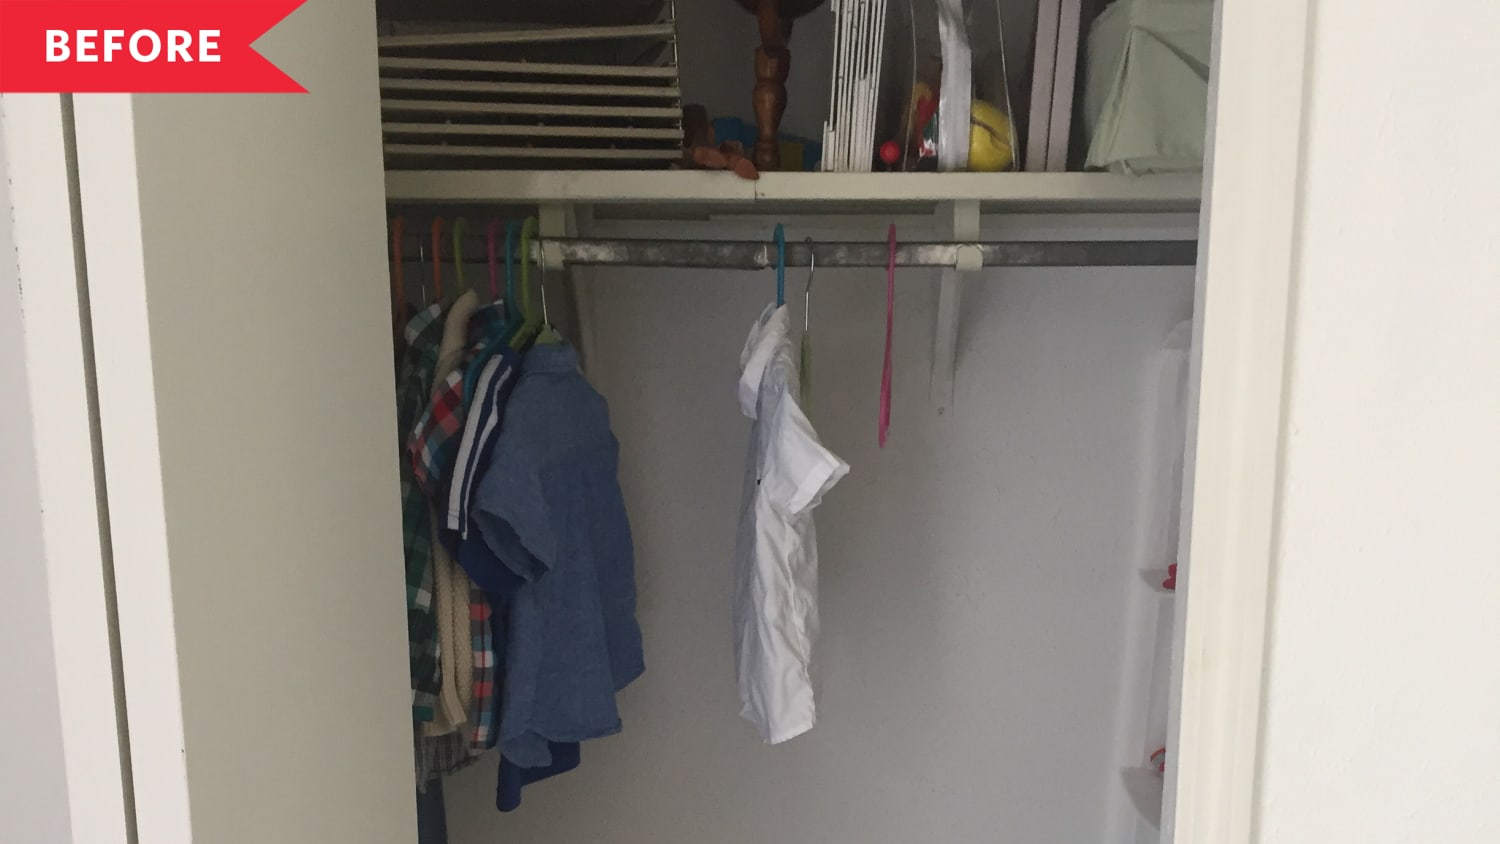 https://cdn.apartmenttherapy.info/image/upload/f_jpg,q_auto:eco,c_fill,g_auto,w_1500,ar_16:9/at%2Fhome-projects%2F2020-10%2FAmanda_Walker_closet_before_1_tagged_horiz